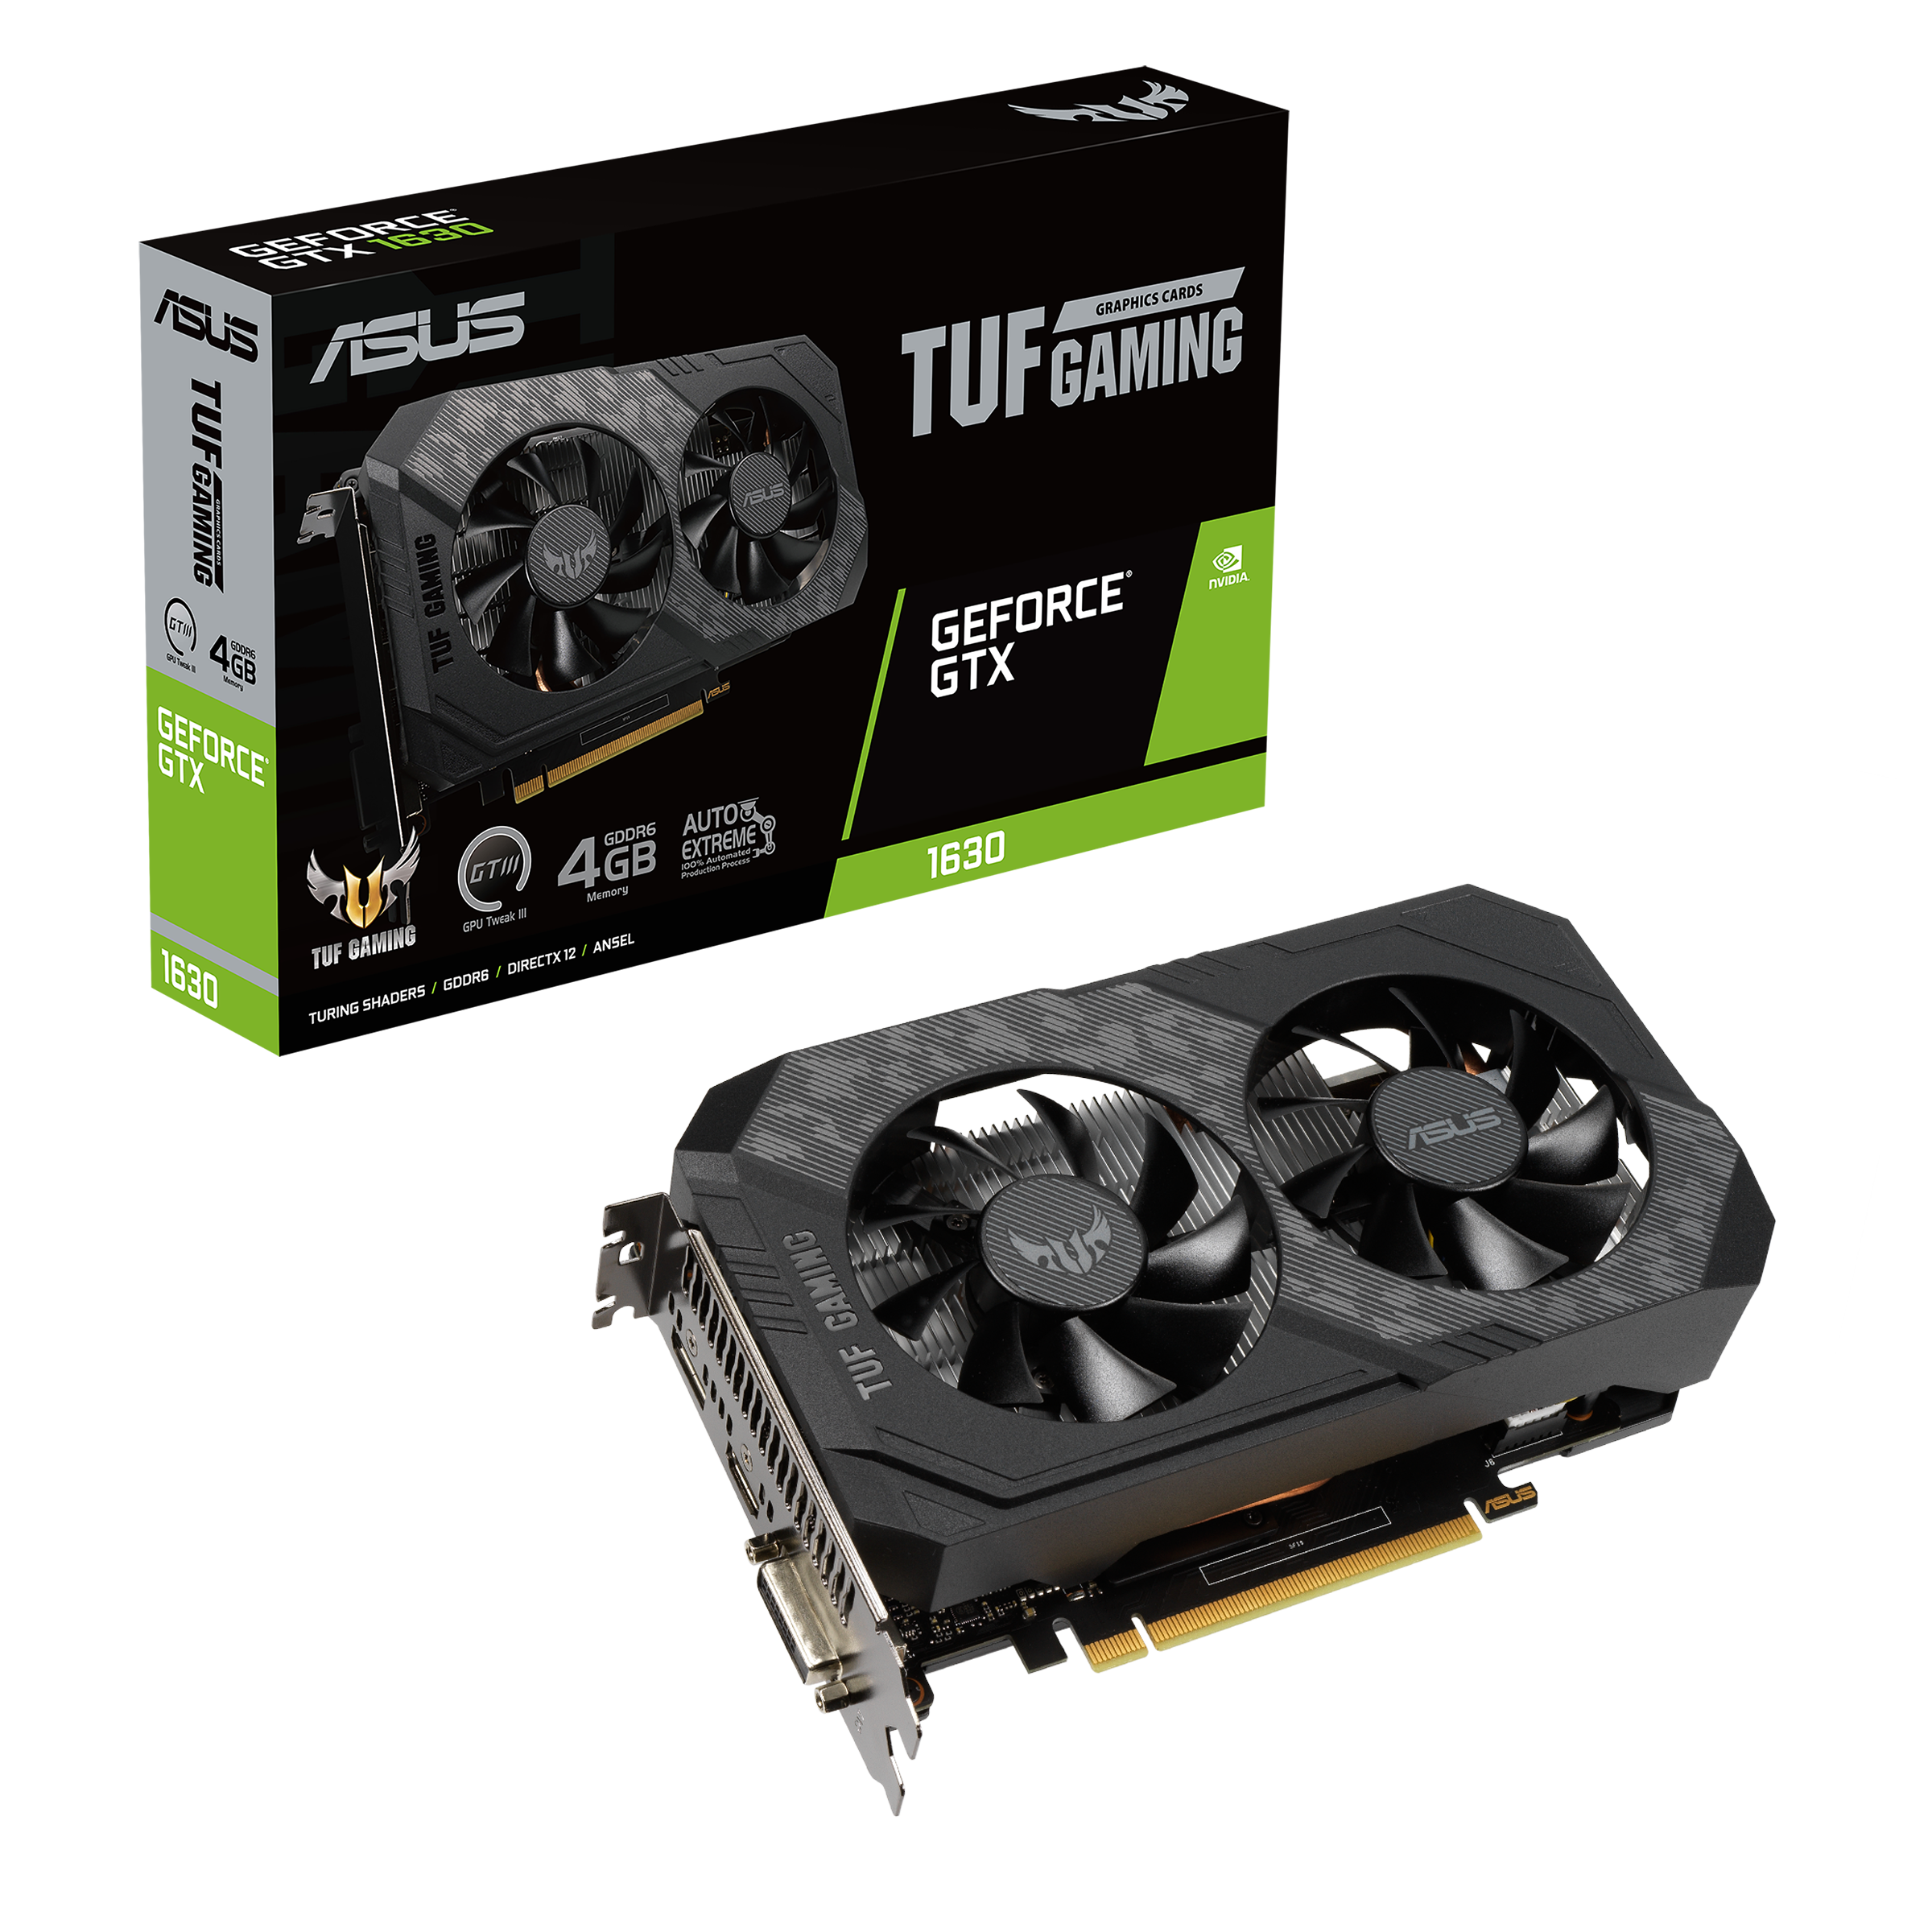 officially launches GTX 1630 |